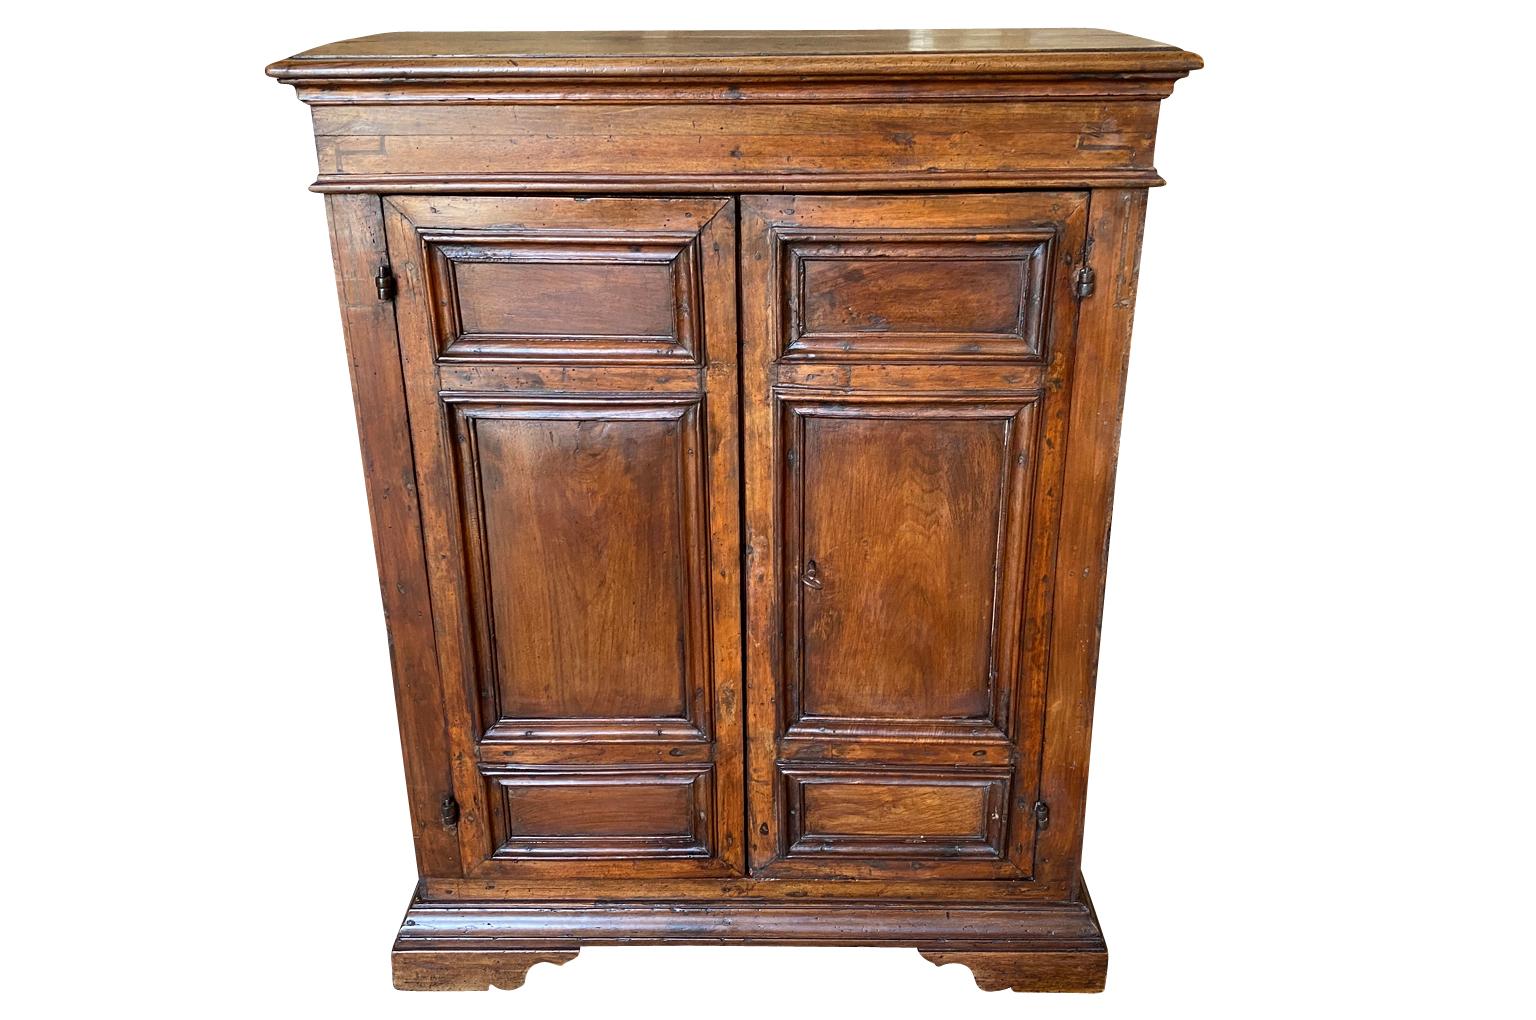 A very handsome early 19th century Credenzino from the Lombardy region of Italy. Soundly constructed from beautiful walnut a shaped top above double doors, interior shelving raised on bracket feet.